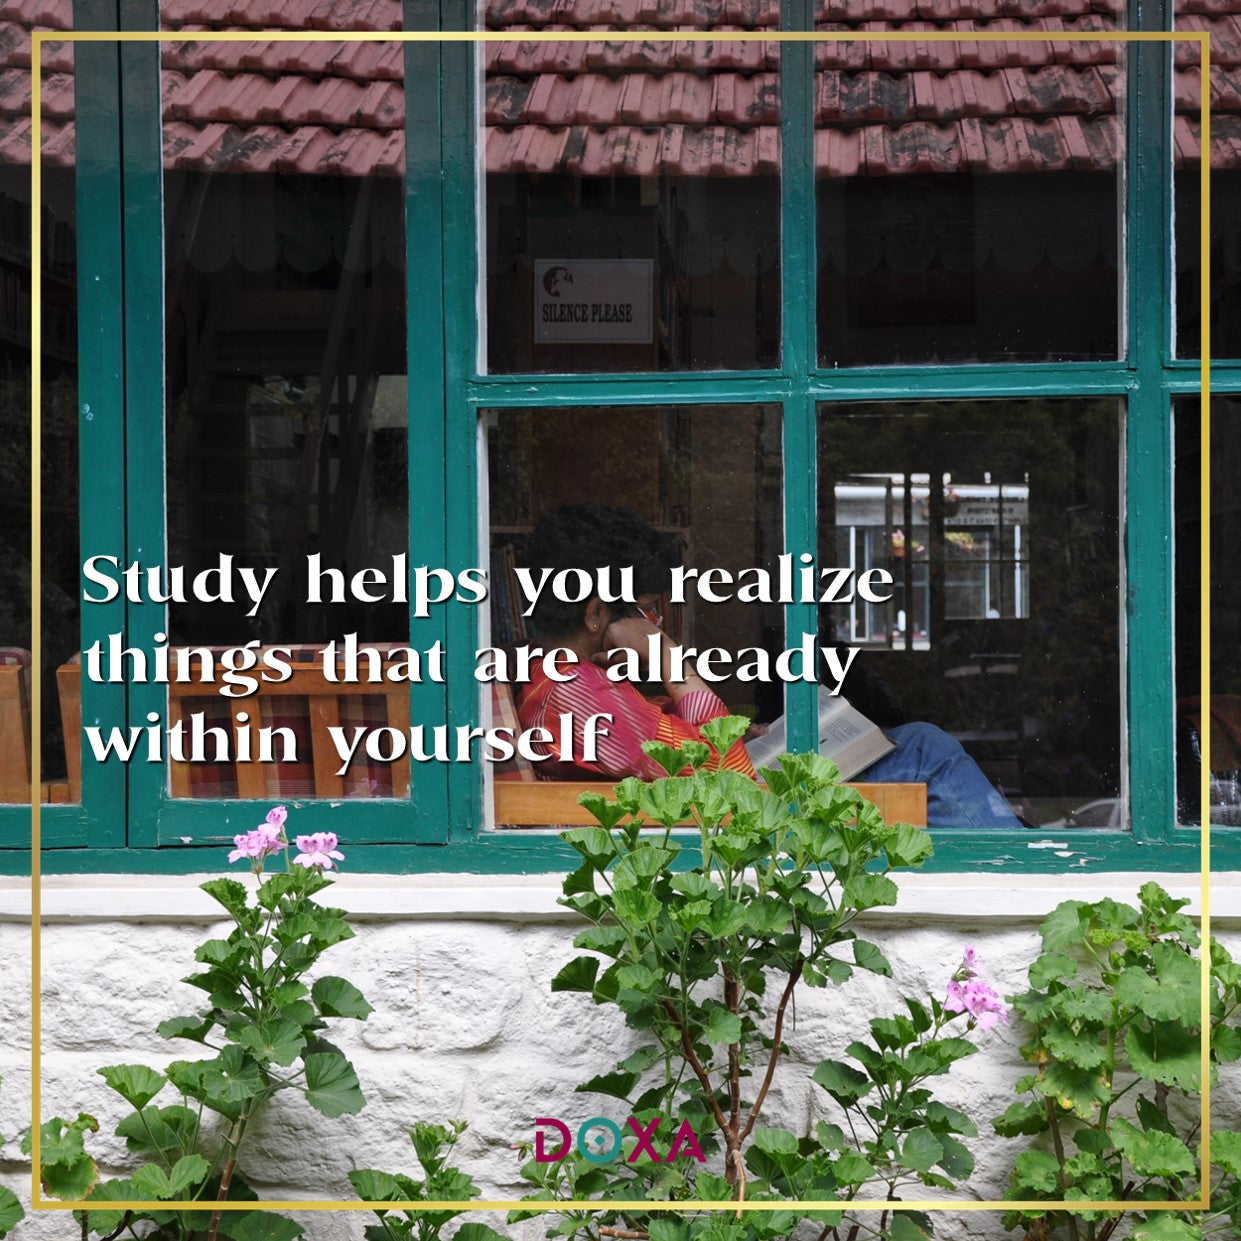 Study helps you realize things that are already within yourself